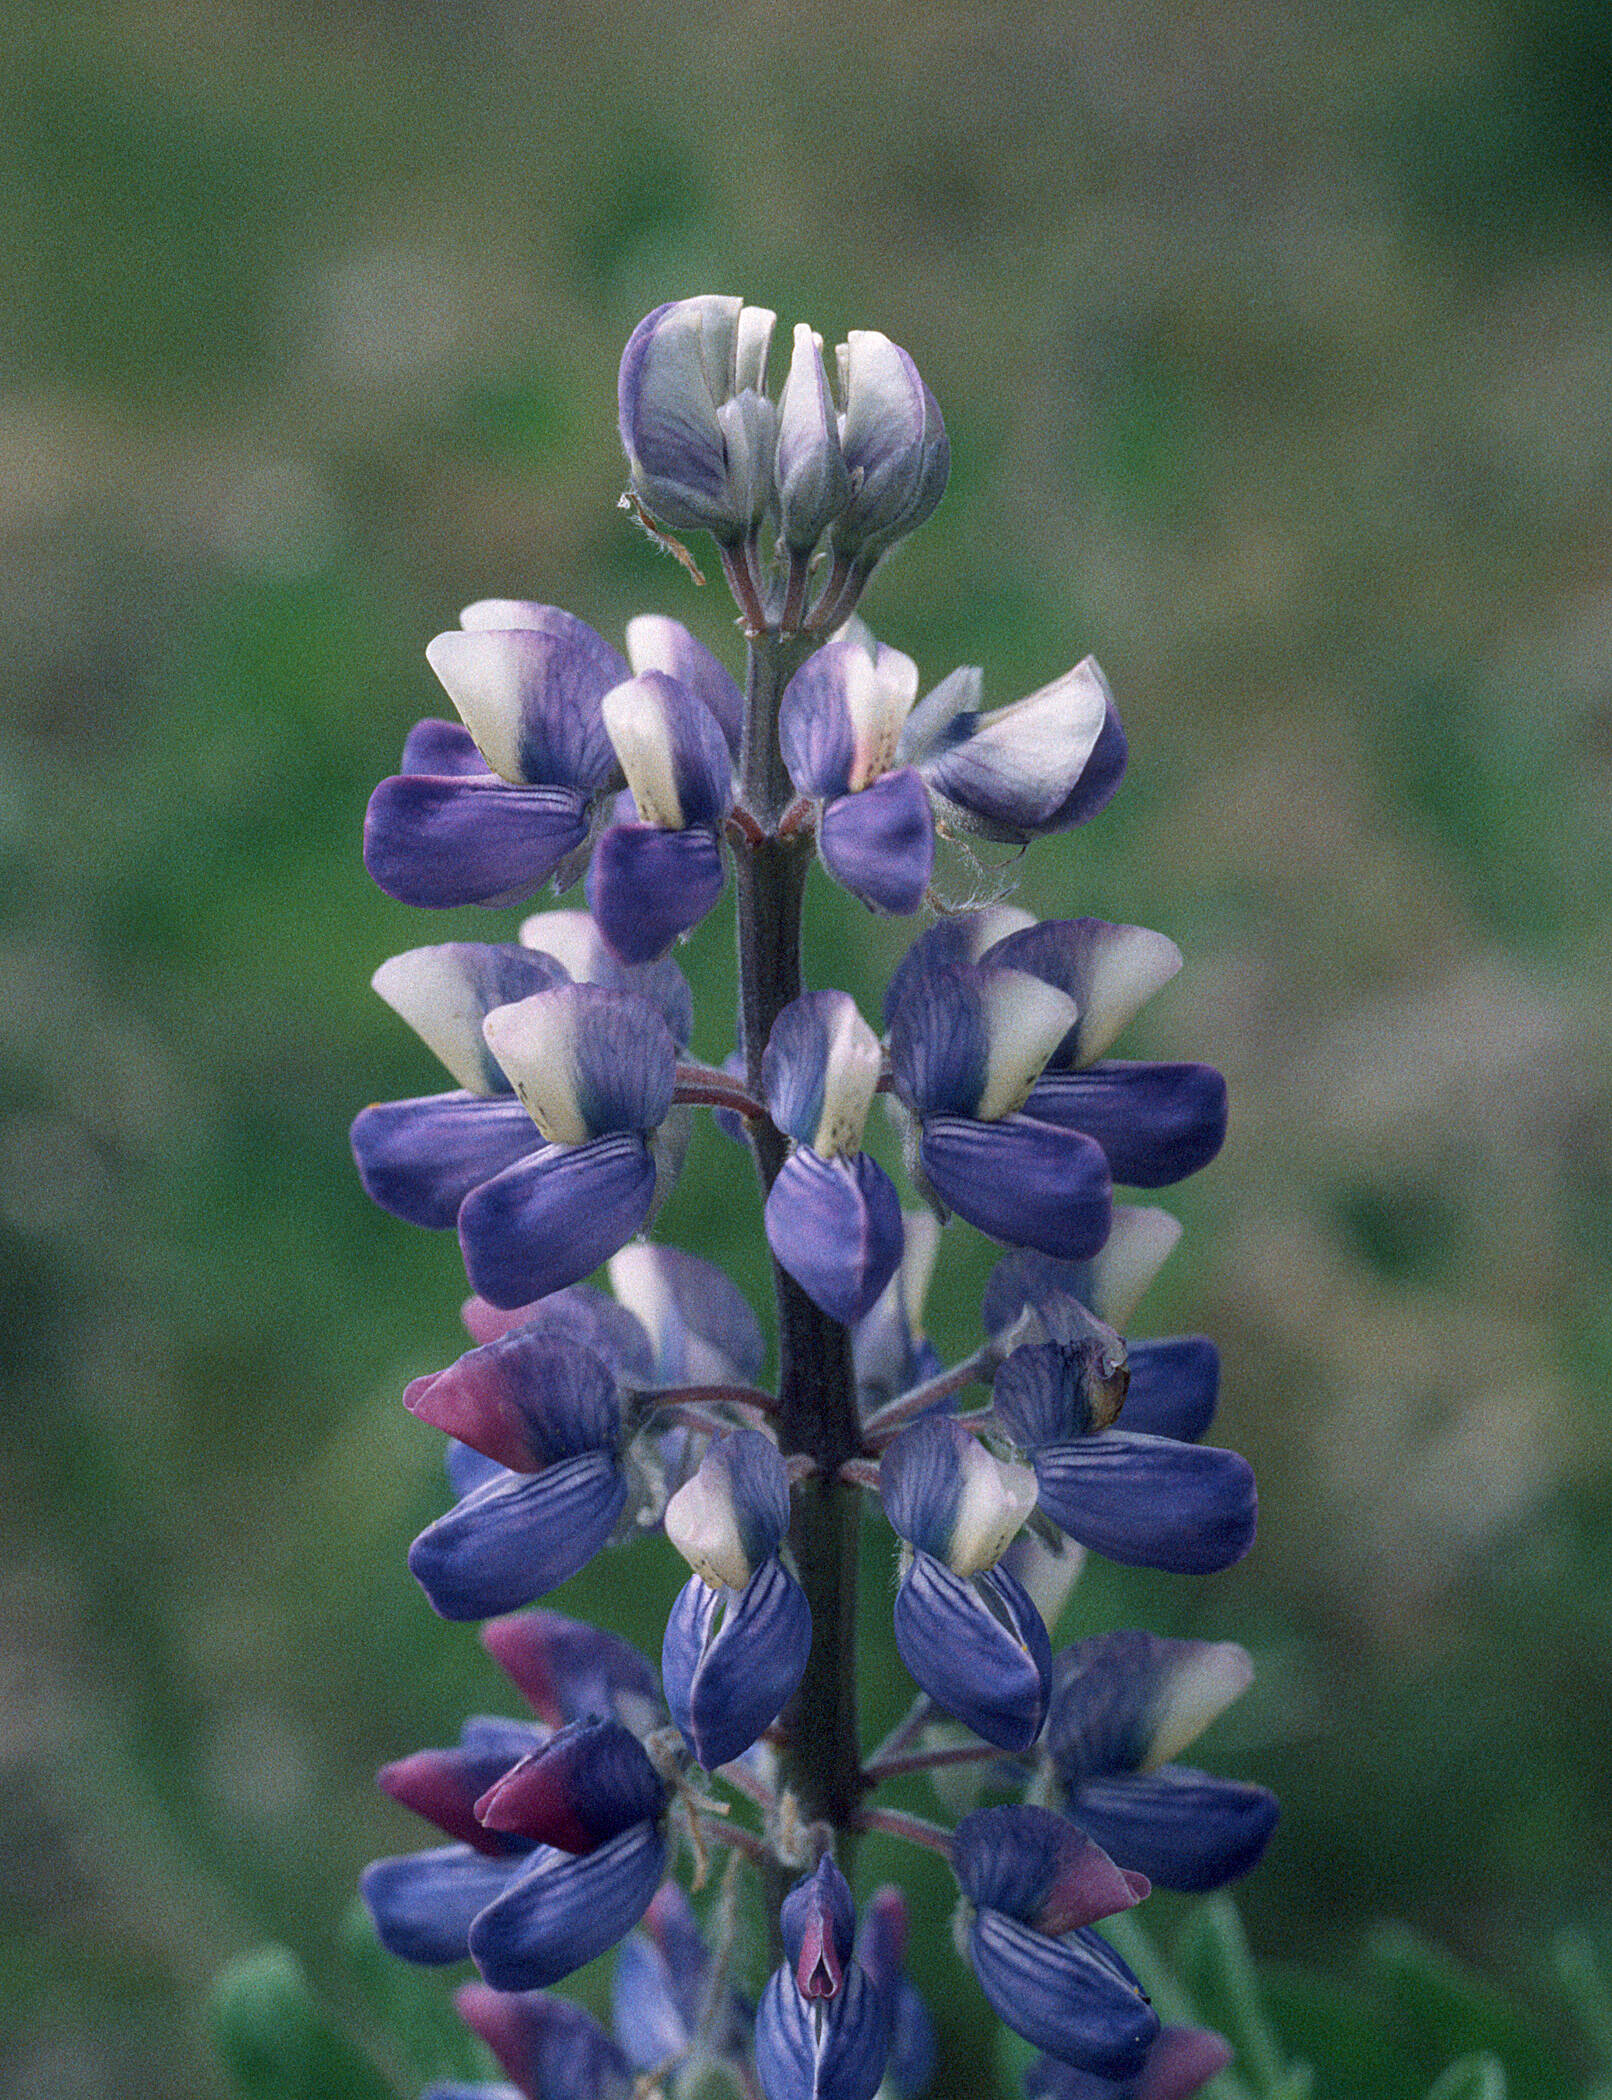 The upper petals of lupine flowers are whitish before they have been visited by bees, as a signal that pollen is still available; they turn dark after visitation. (Photo by Bob Armstrong)